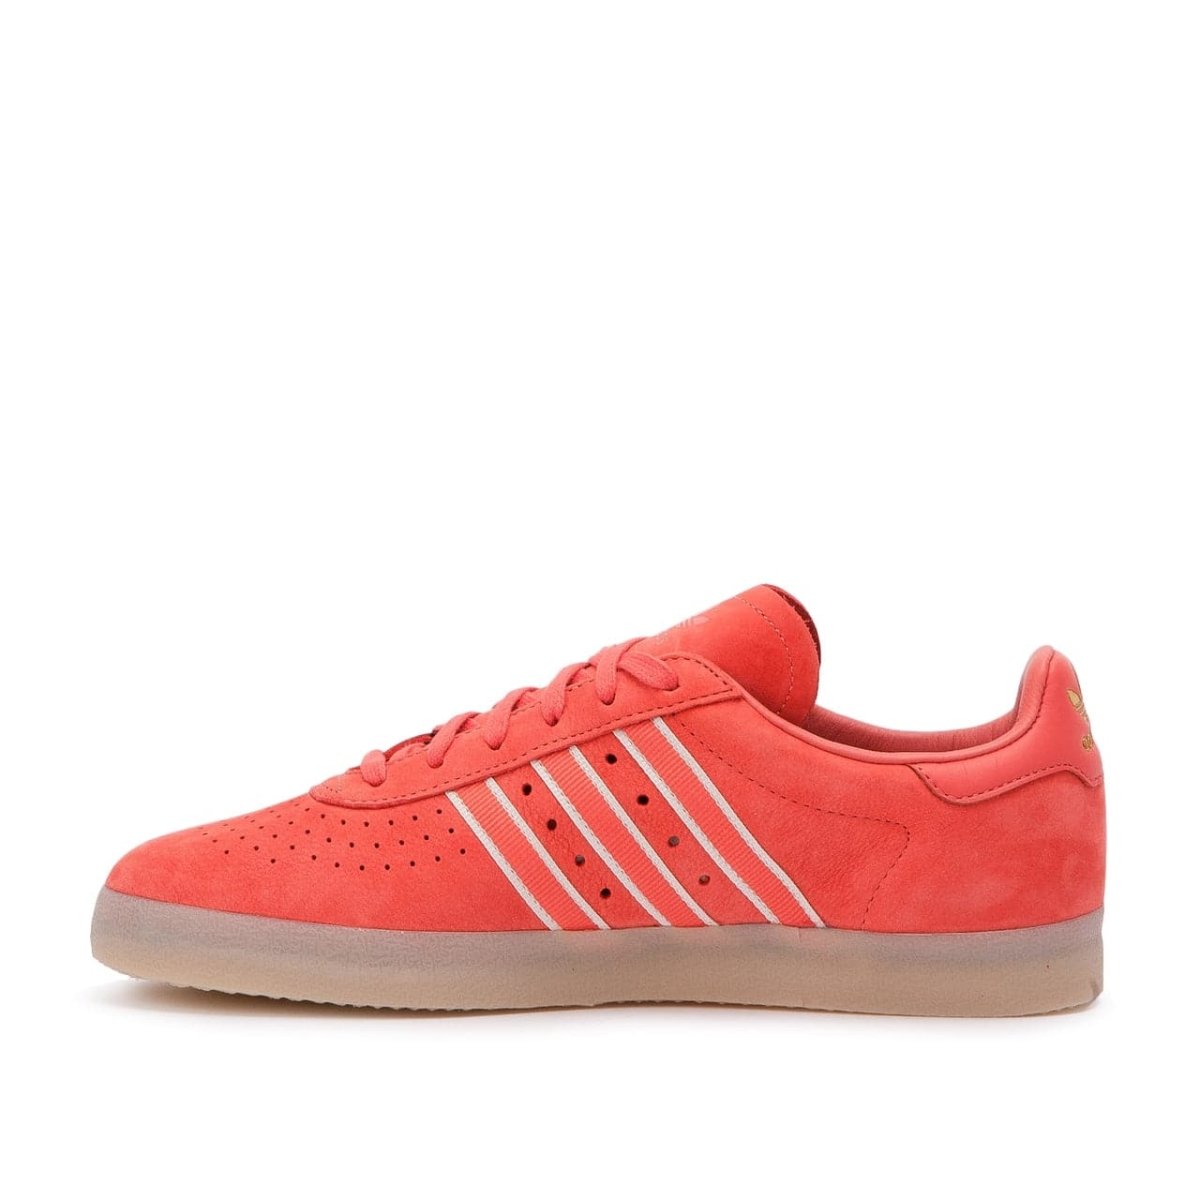 adidas x Oyster 350 (Red / Clear White Gold Metallic) DB1975 – Allike Store